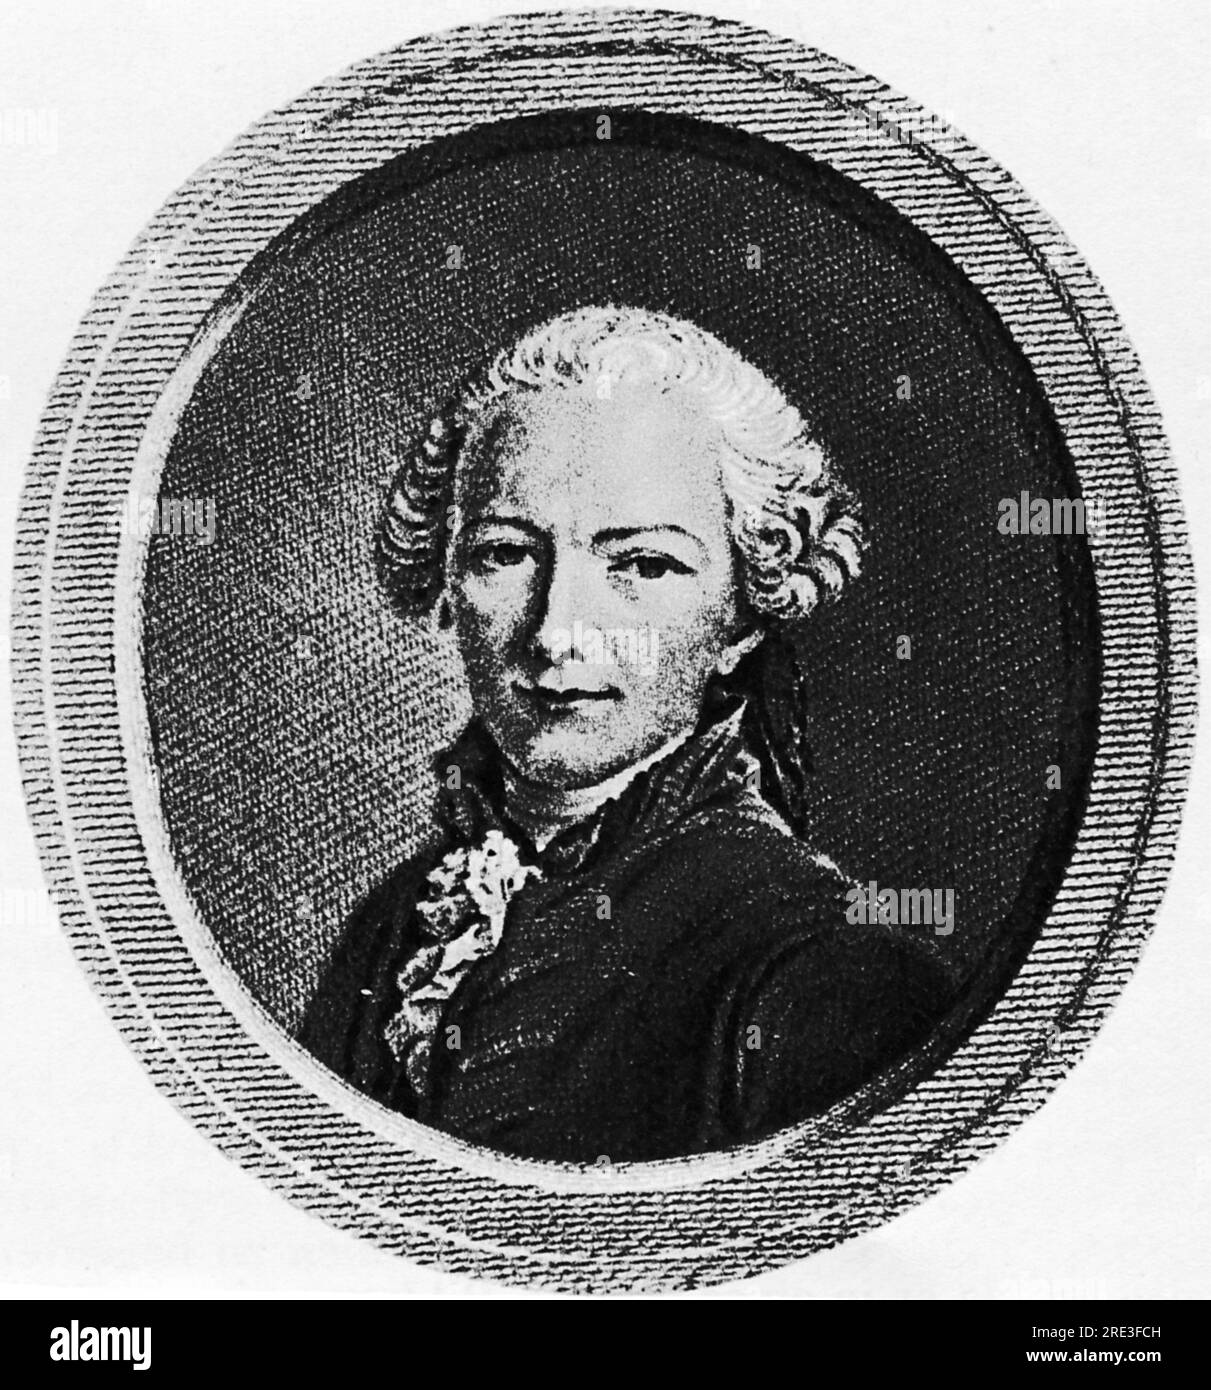 Winckler, Gottfried, 16.2.1731 - 23.11.1795, German merchant and art collector, ADDITIONAL-RIGHTS-CLEARANCE-INFO-NOT-AVAILABLE Stock Photo